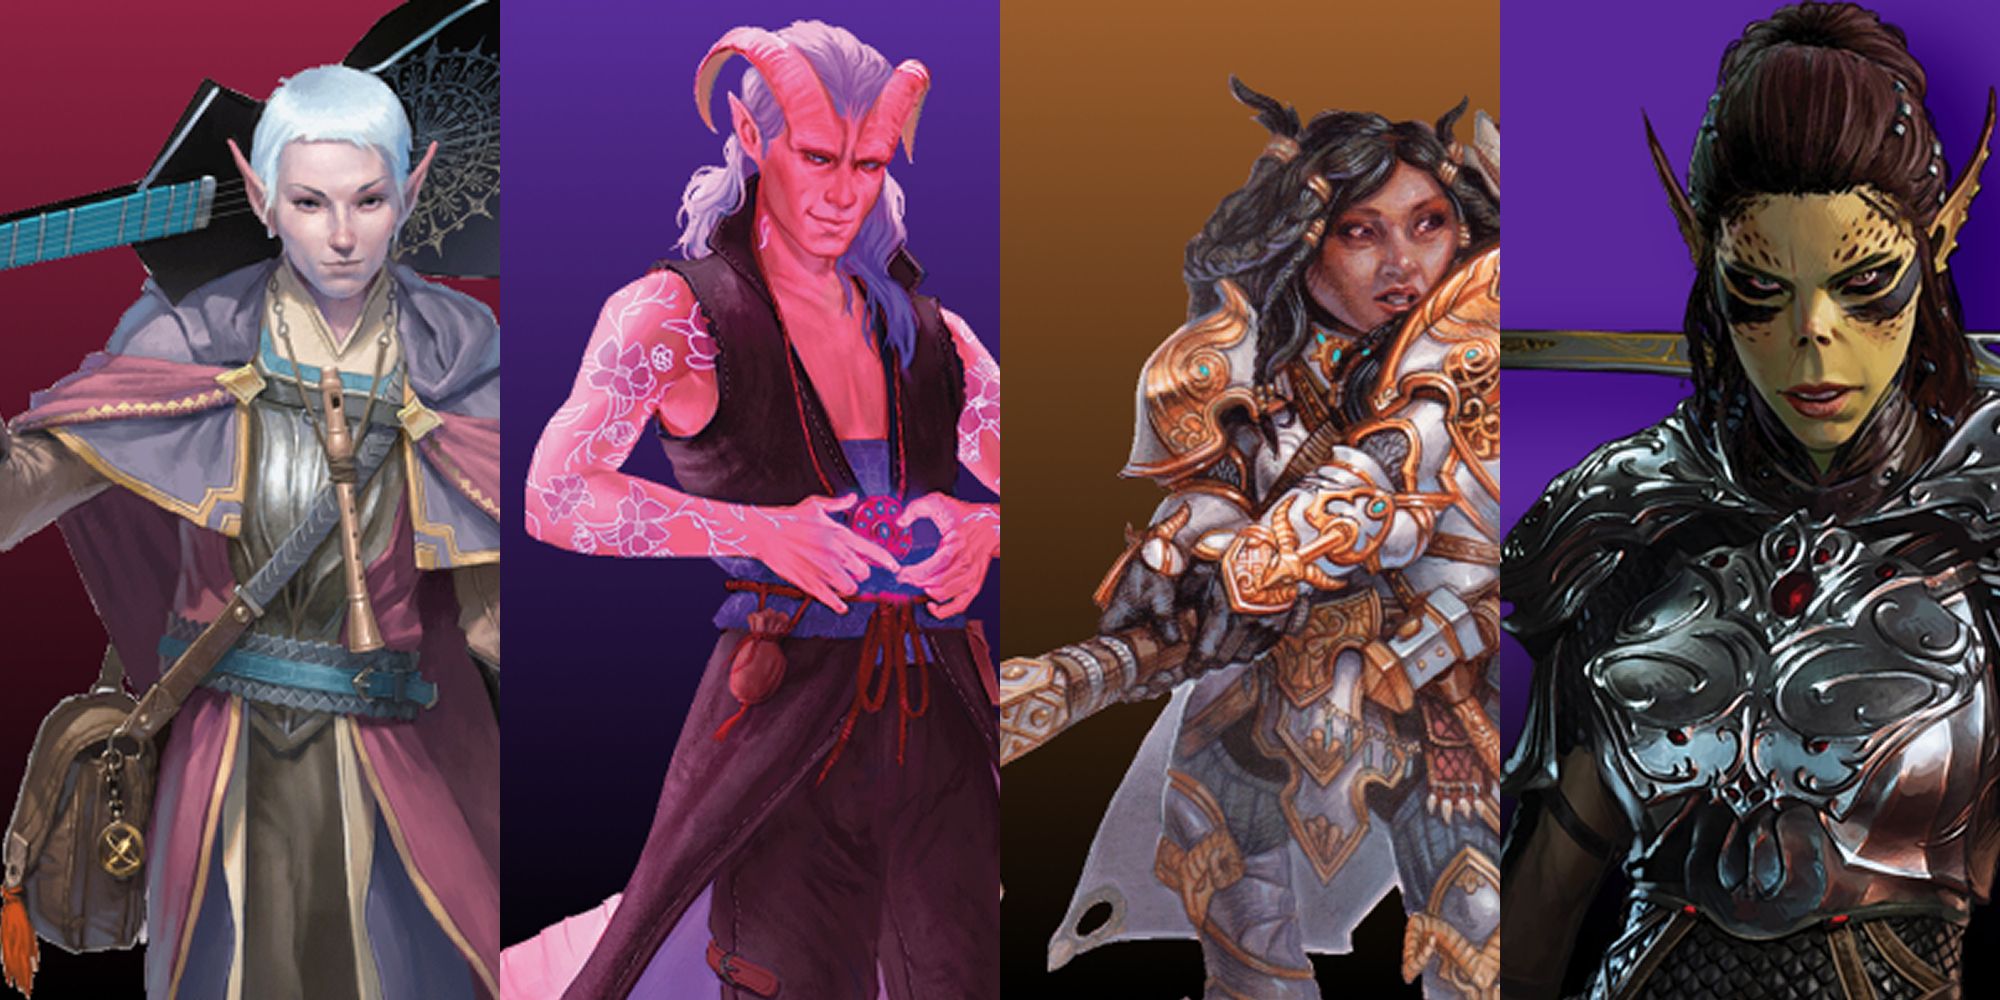 A Split Image Depicting A Bard, Warlock, Cleric, And Fighter From Dungeons And Dragons